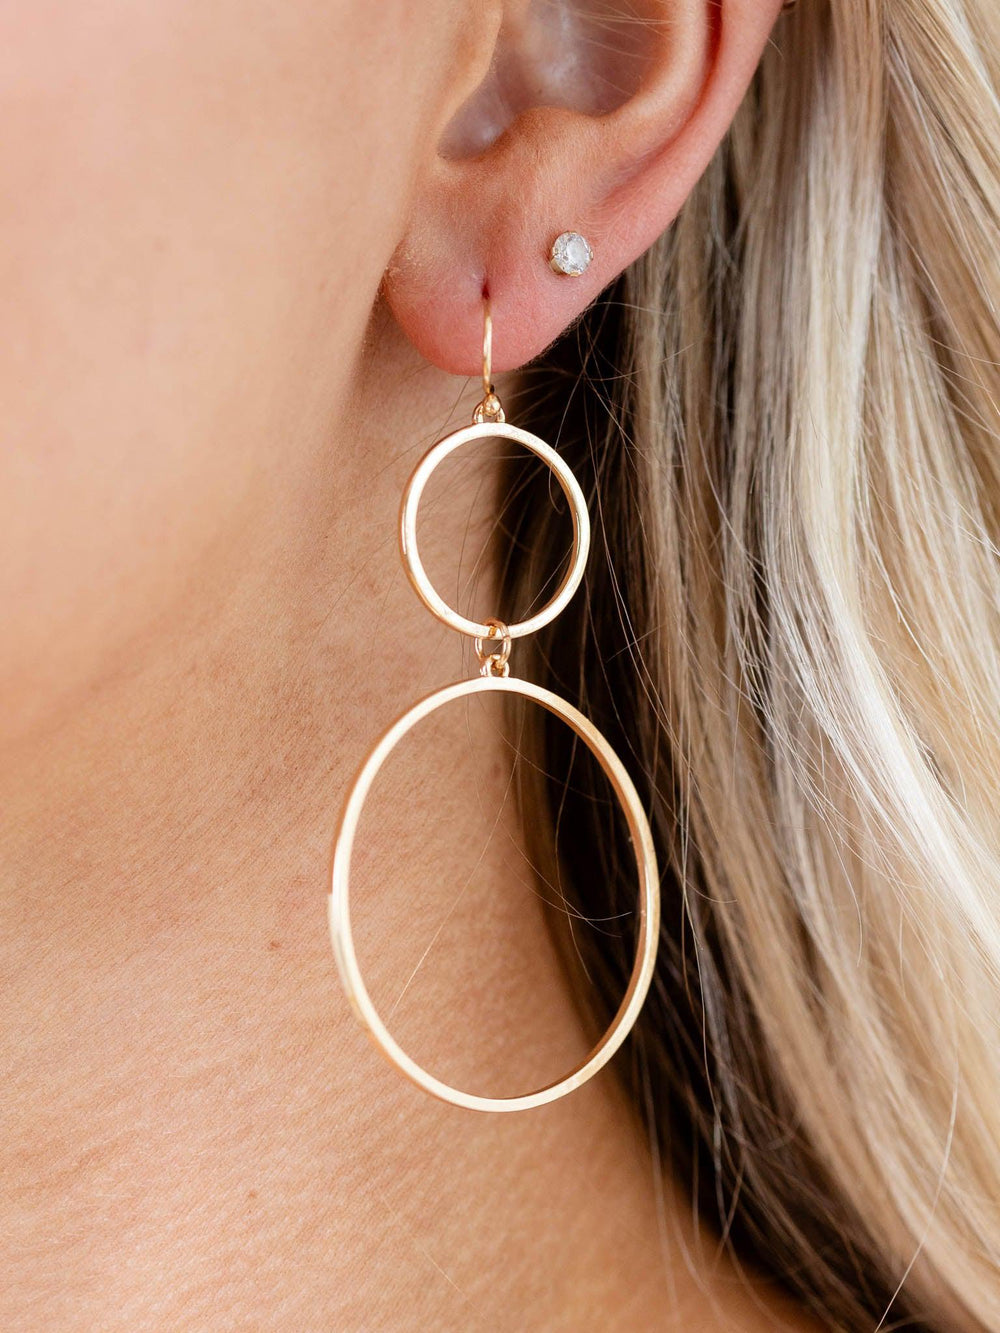 New Prospects-Double Circle Earrings - Leela and Lavender